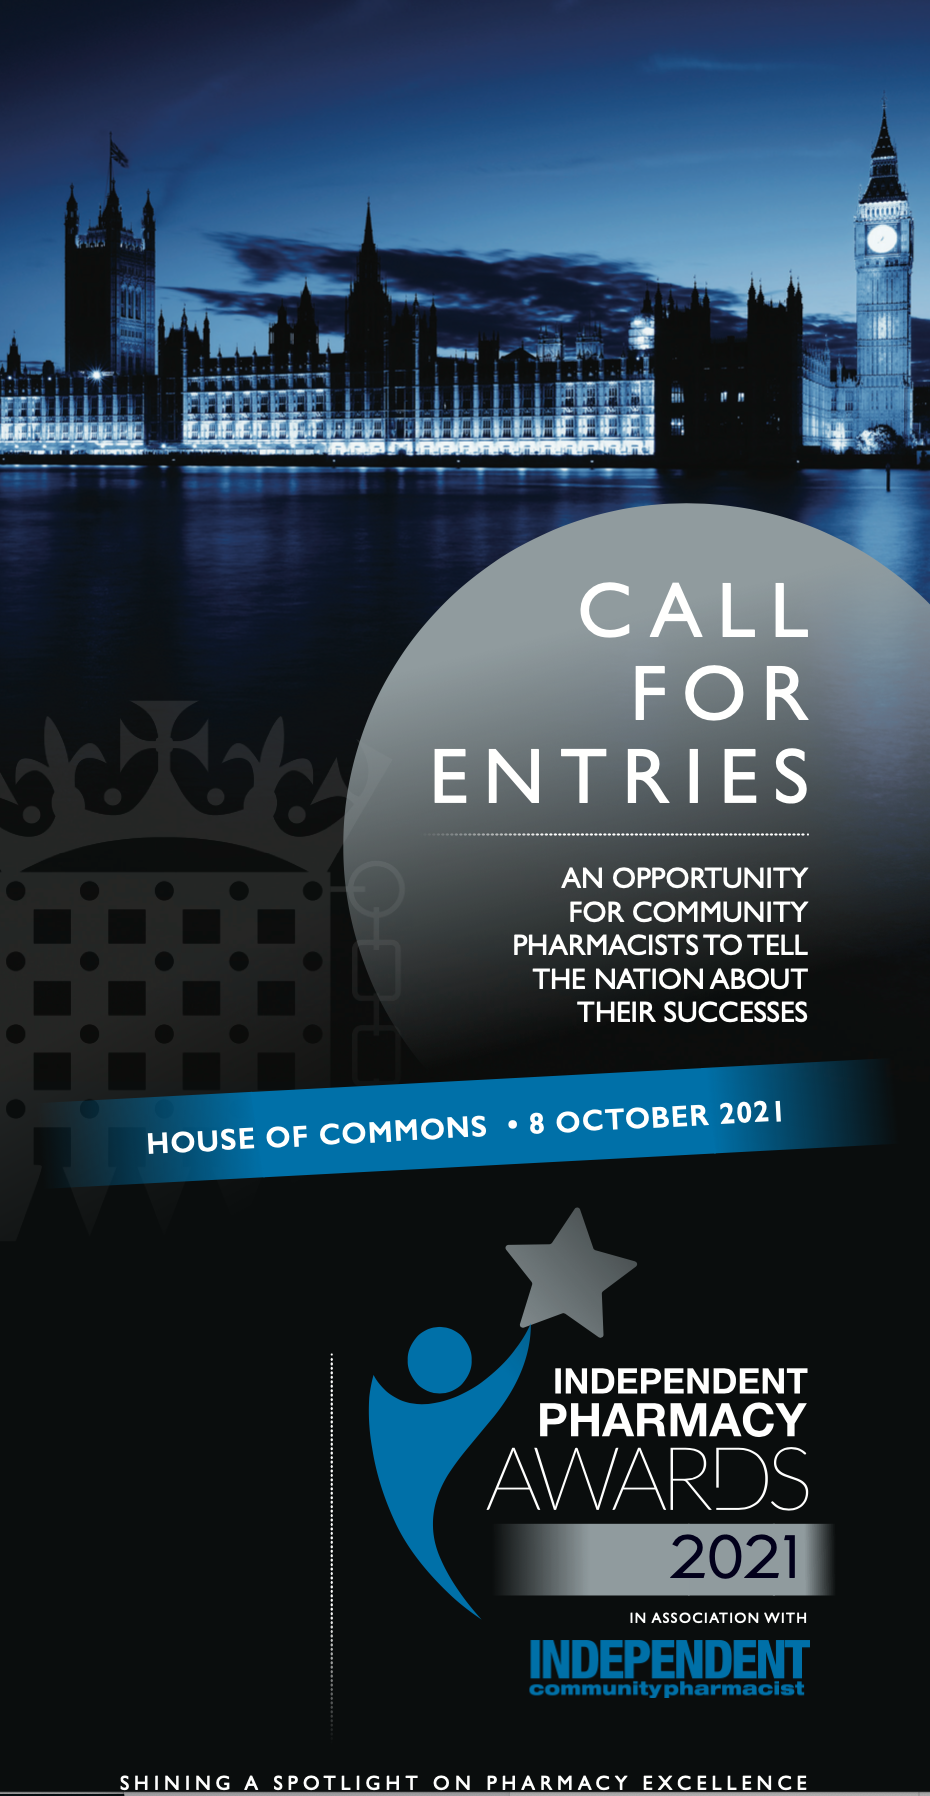 Independent Pharmacy Awards 2021 - call for entries image.png